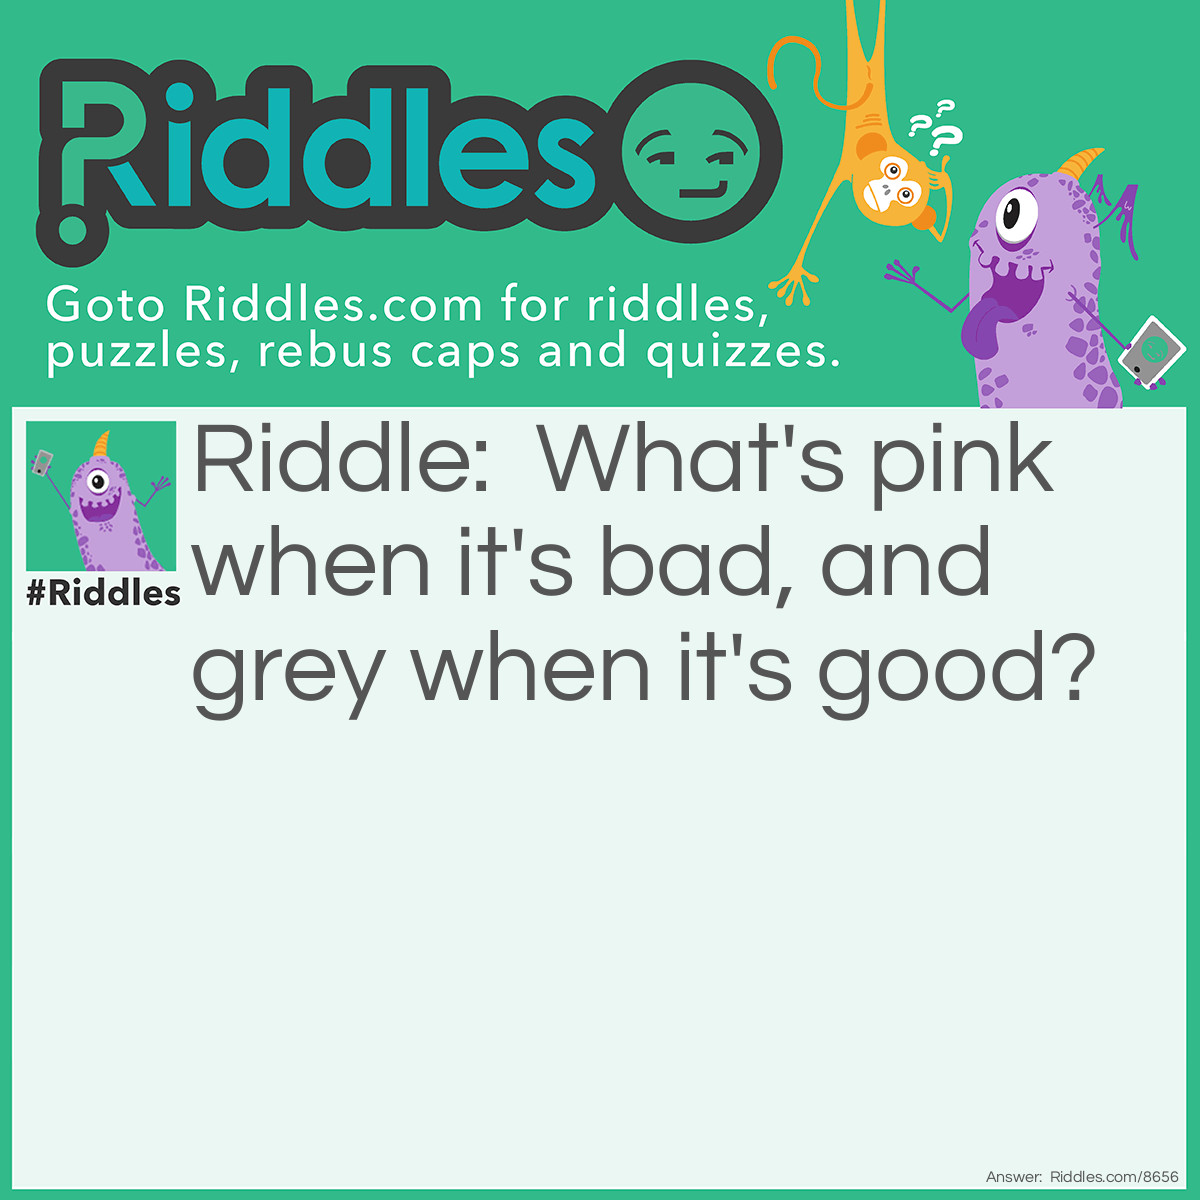 Riddle: What's pink when it's bad, and grey when it's good? Answer: Pork.